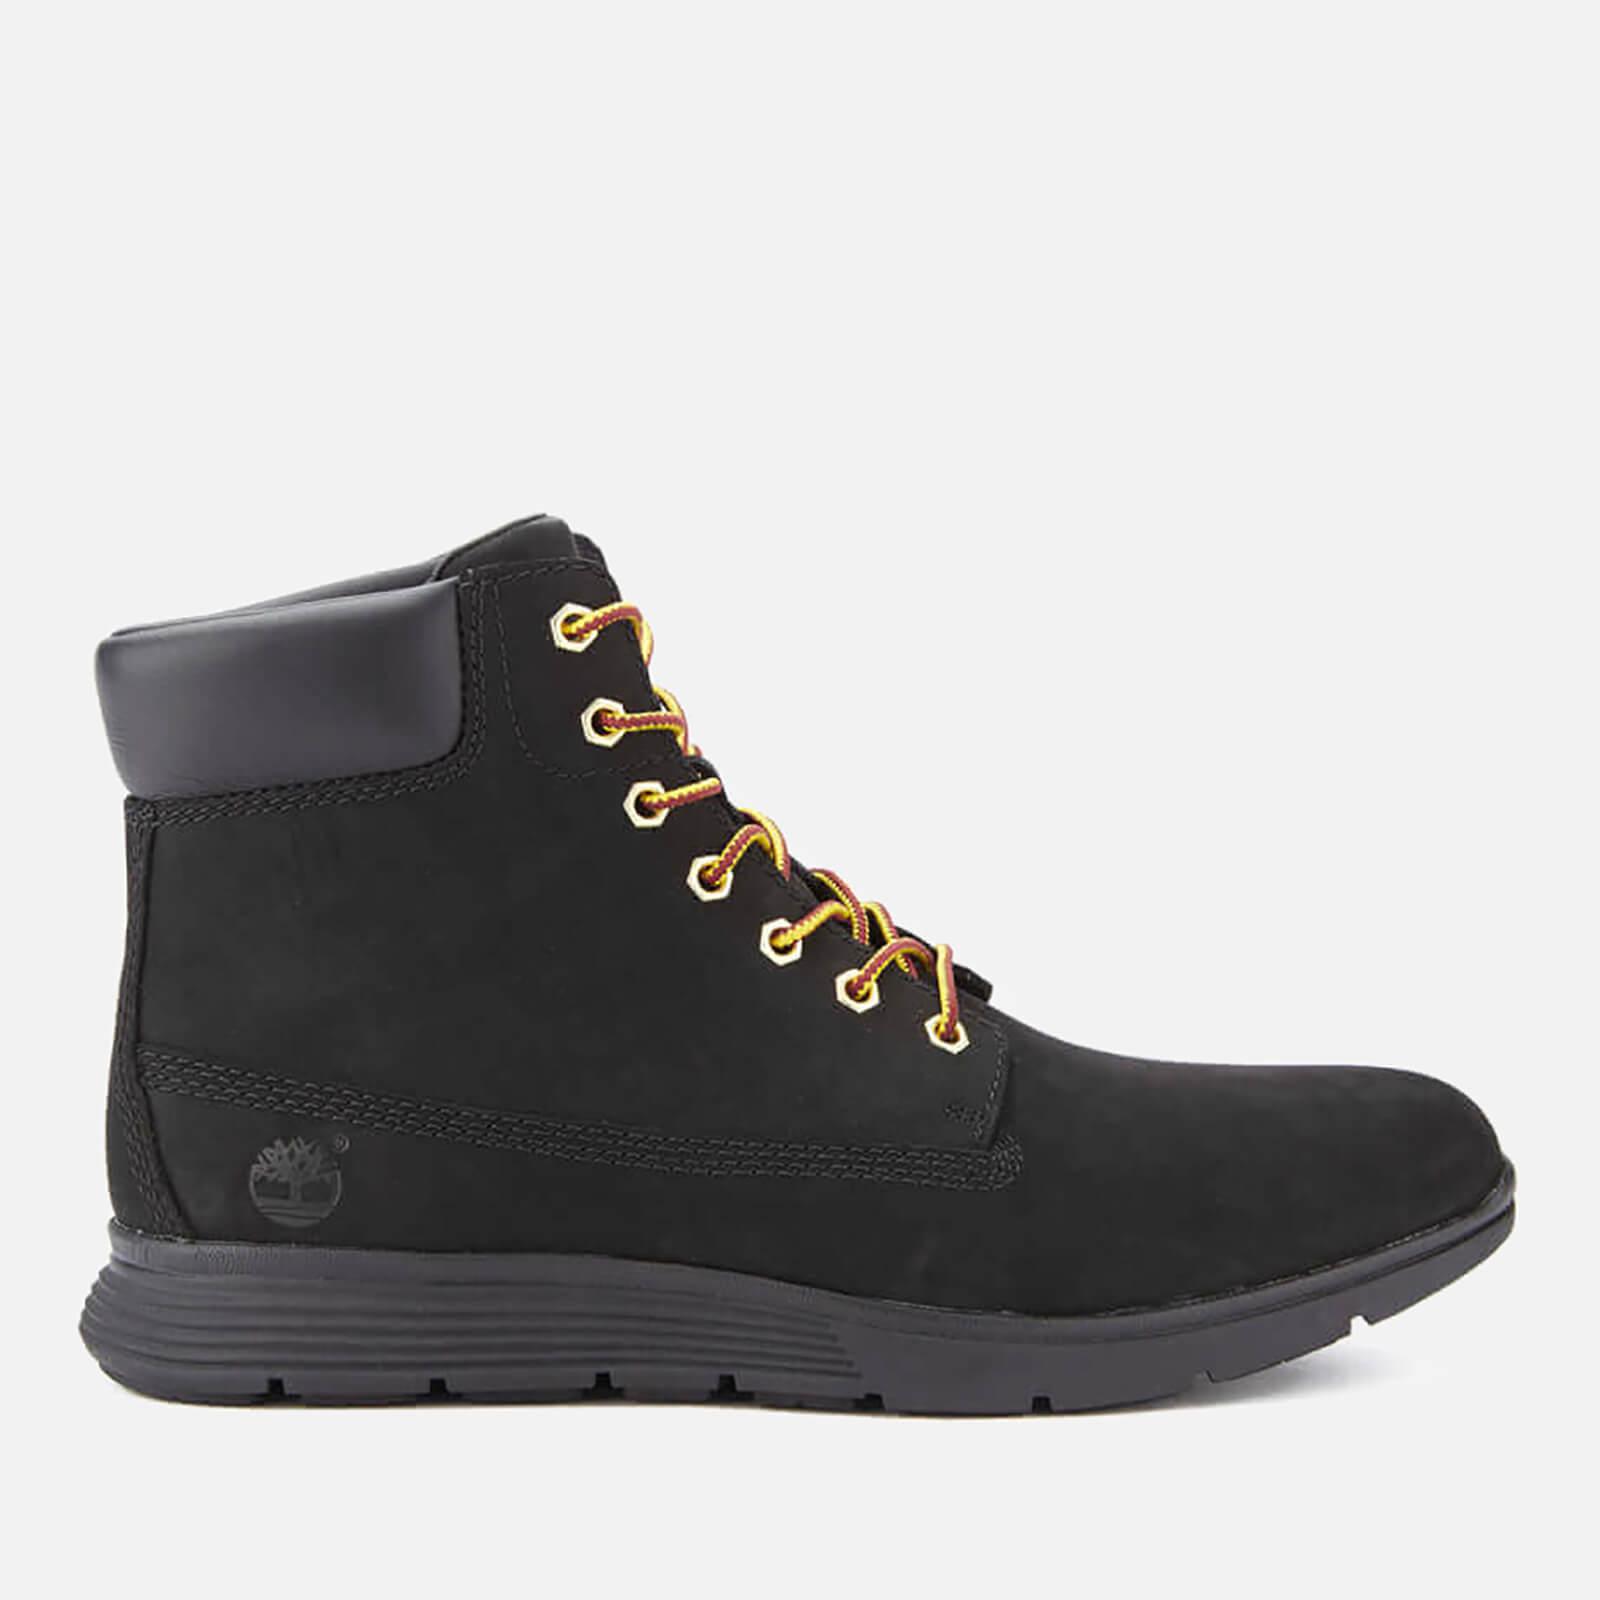 Timberland Killington 6 Inch Boots in Black for Men - Lyst